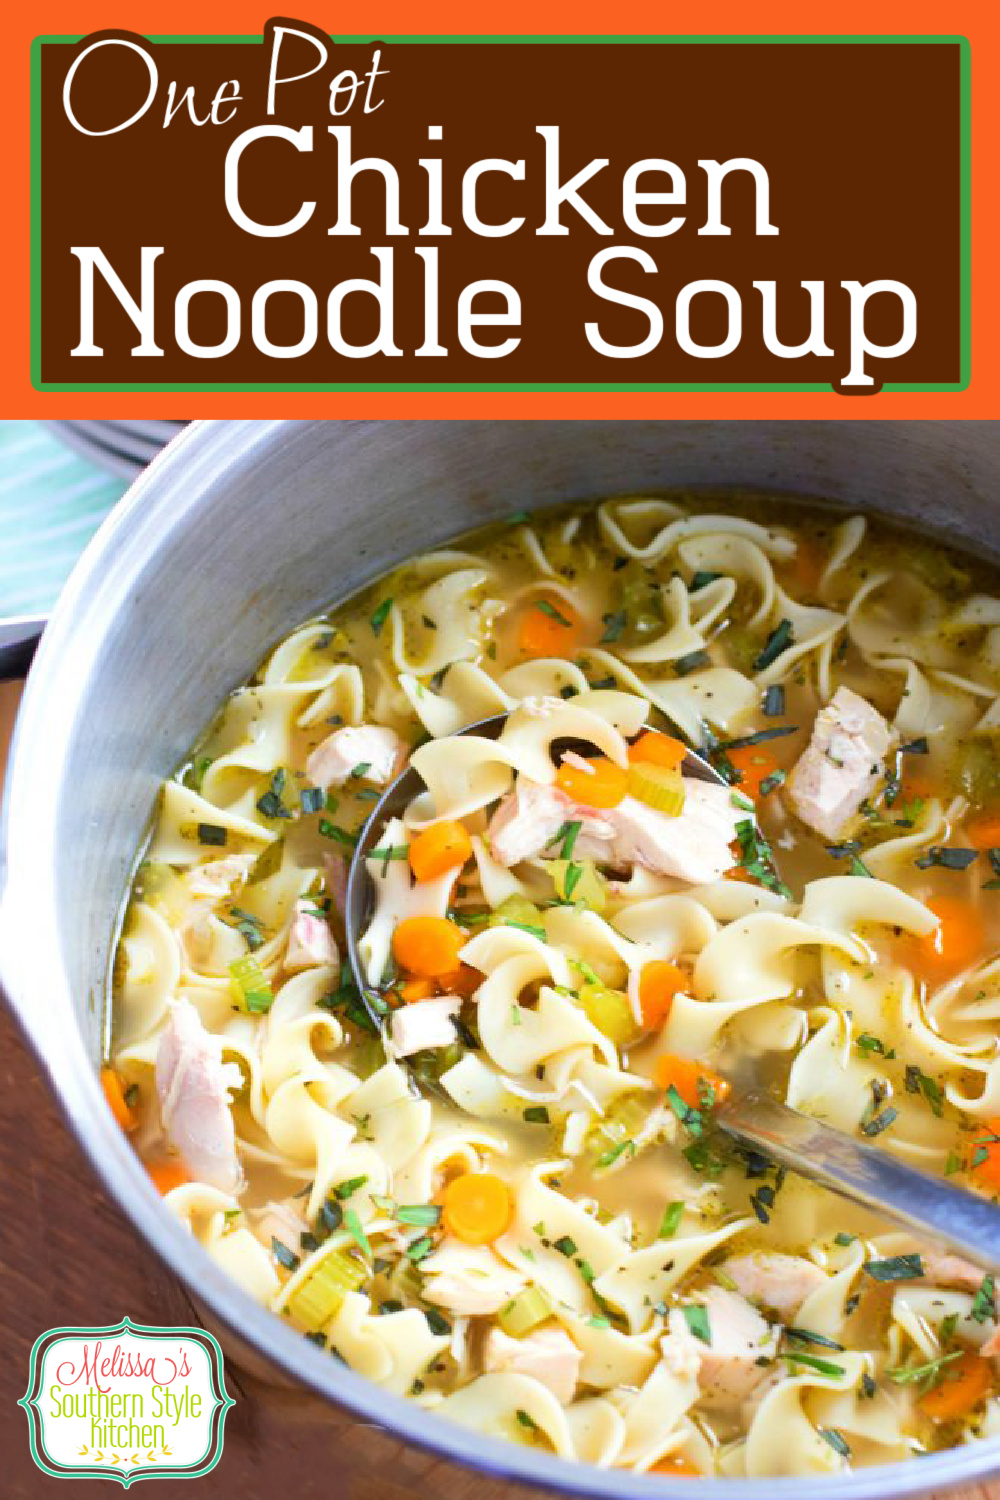 This homemade One Pot Chicken Noodle Soup will cure what ails you #chickennoodlesoup #chickenrecipes #easychickenrecipes #bestchickennoodlesoup #souprecipes #chickensoup #dinner #southernrecipes #easydinnerrecipes #onepotrecipes #eggnoodles via @melissasssk